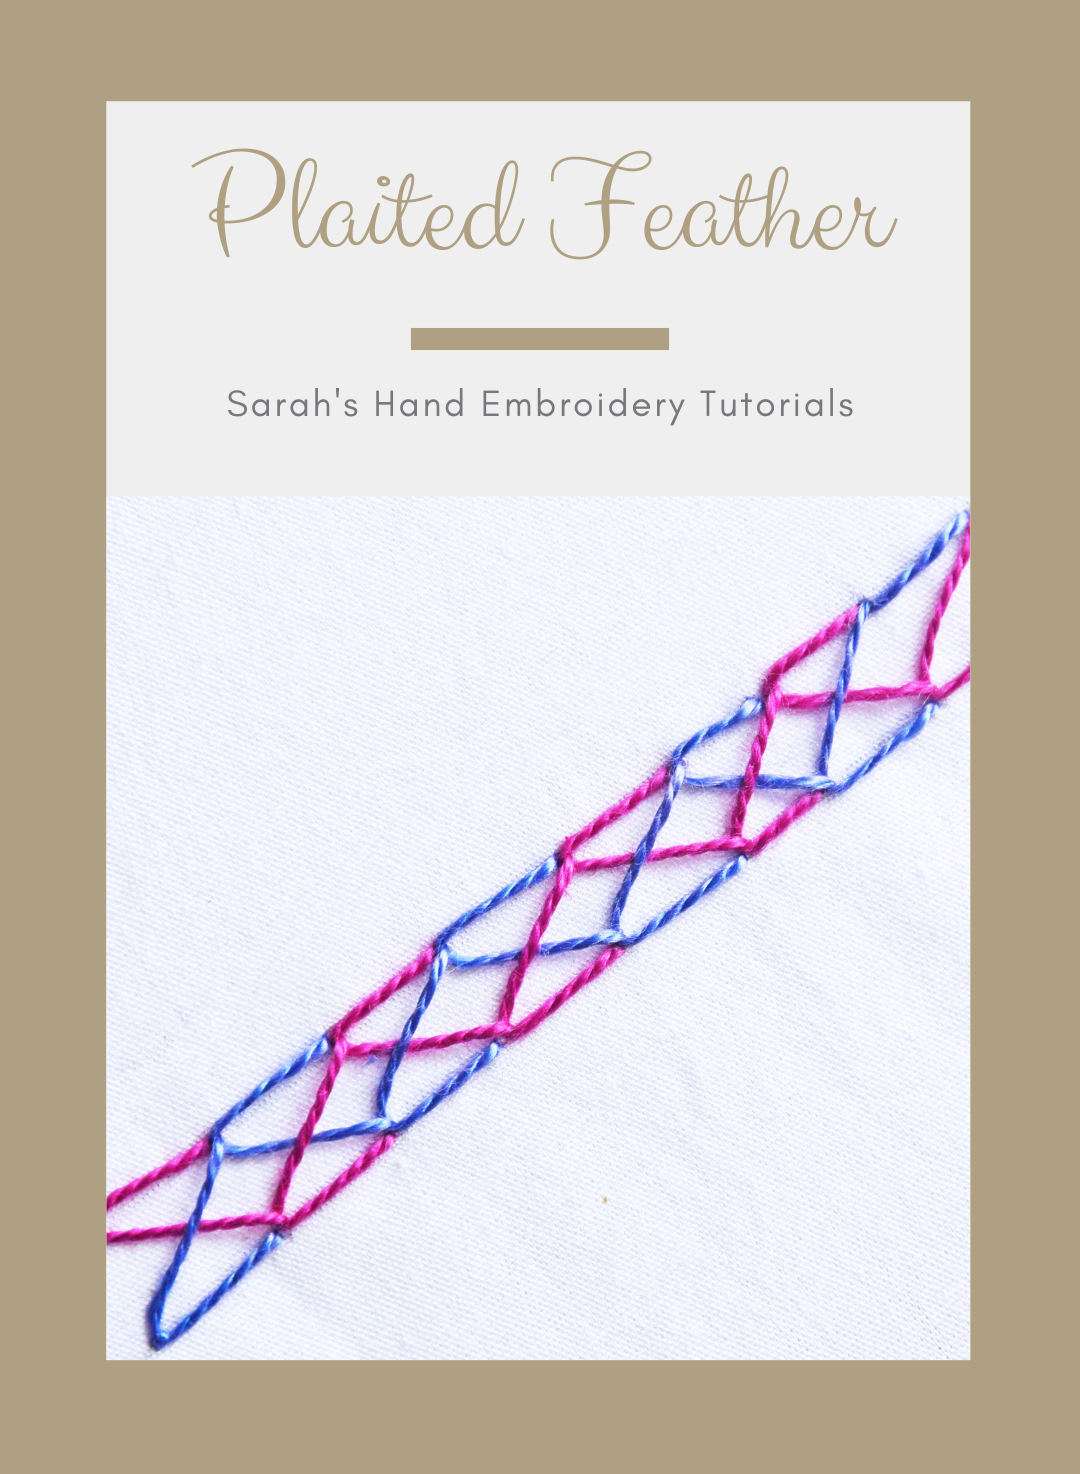 How to do the Plaited Feather Stitch - Sarah's Hand Embroidery